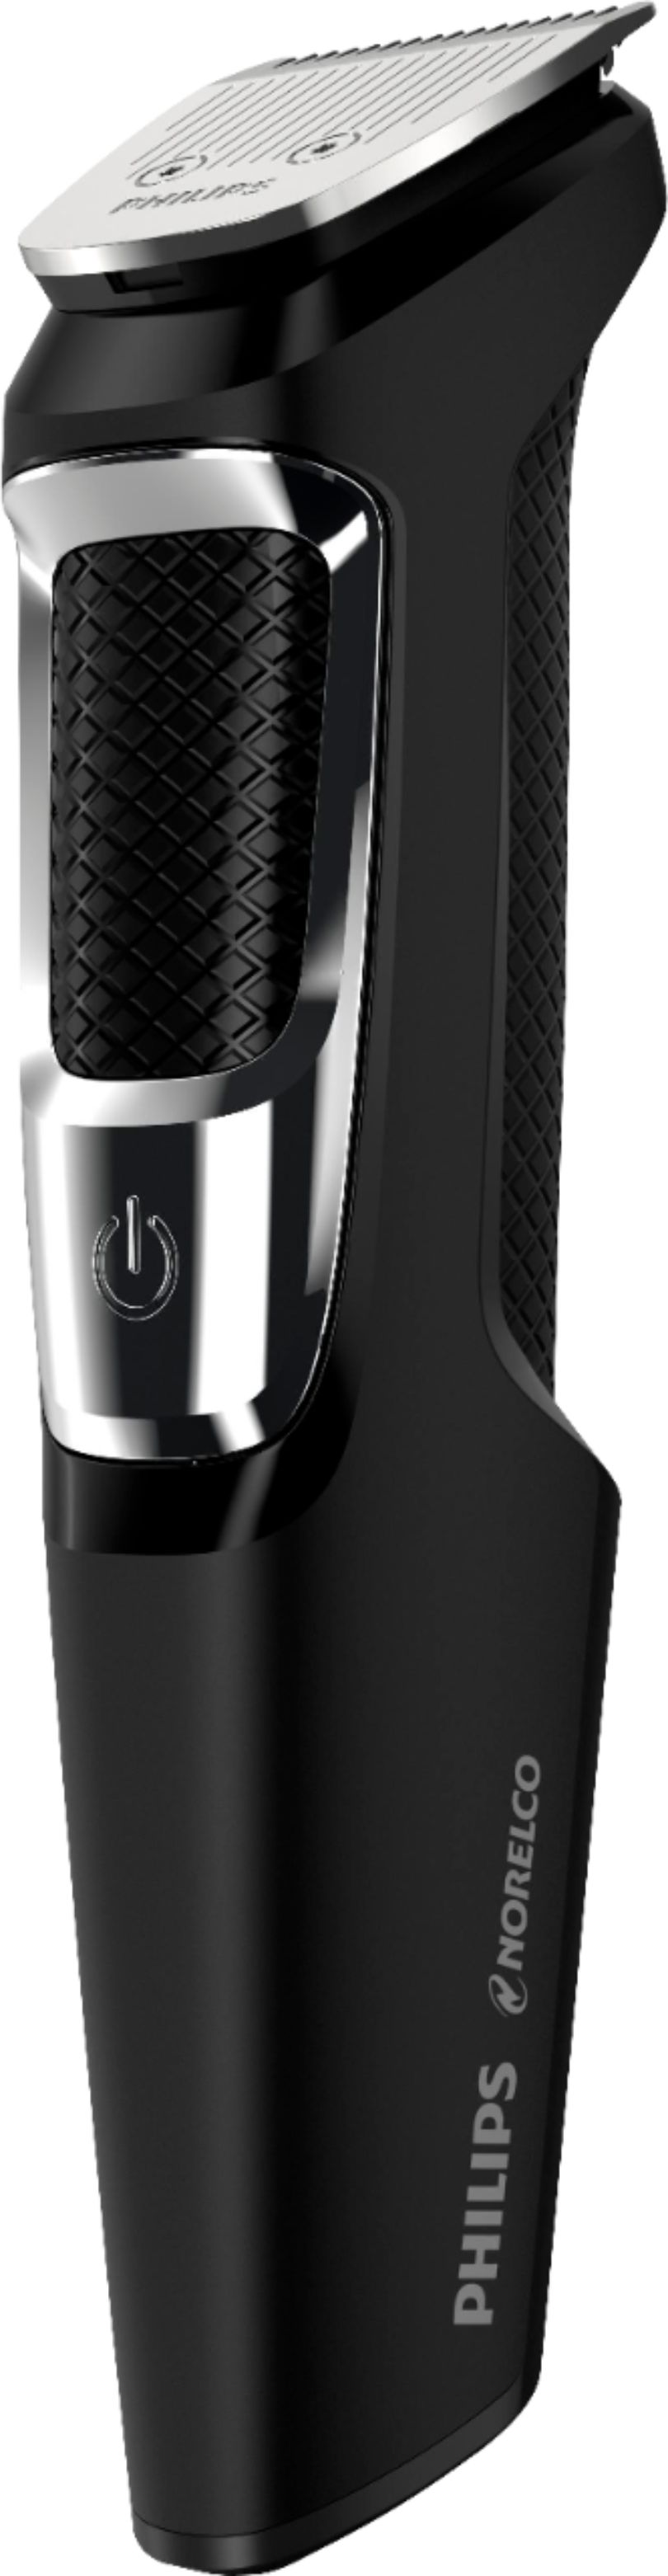 philips norelco multigroom 3000 mg3750 trimmer